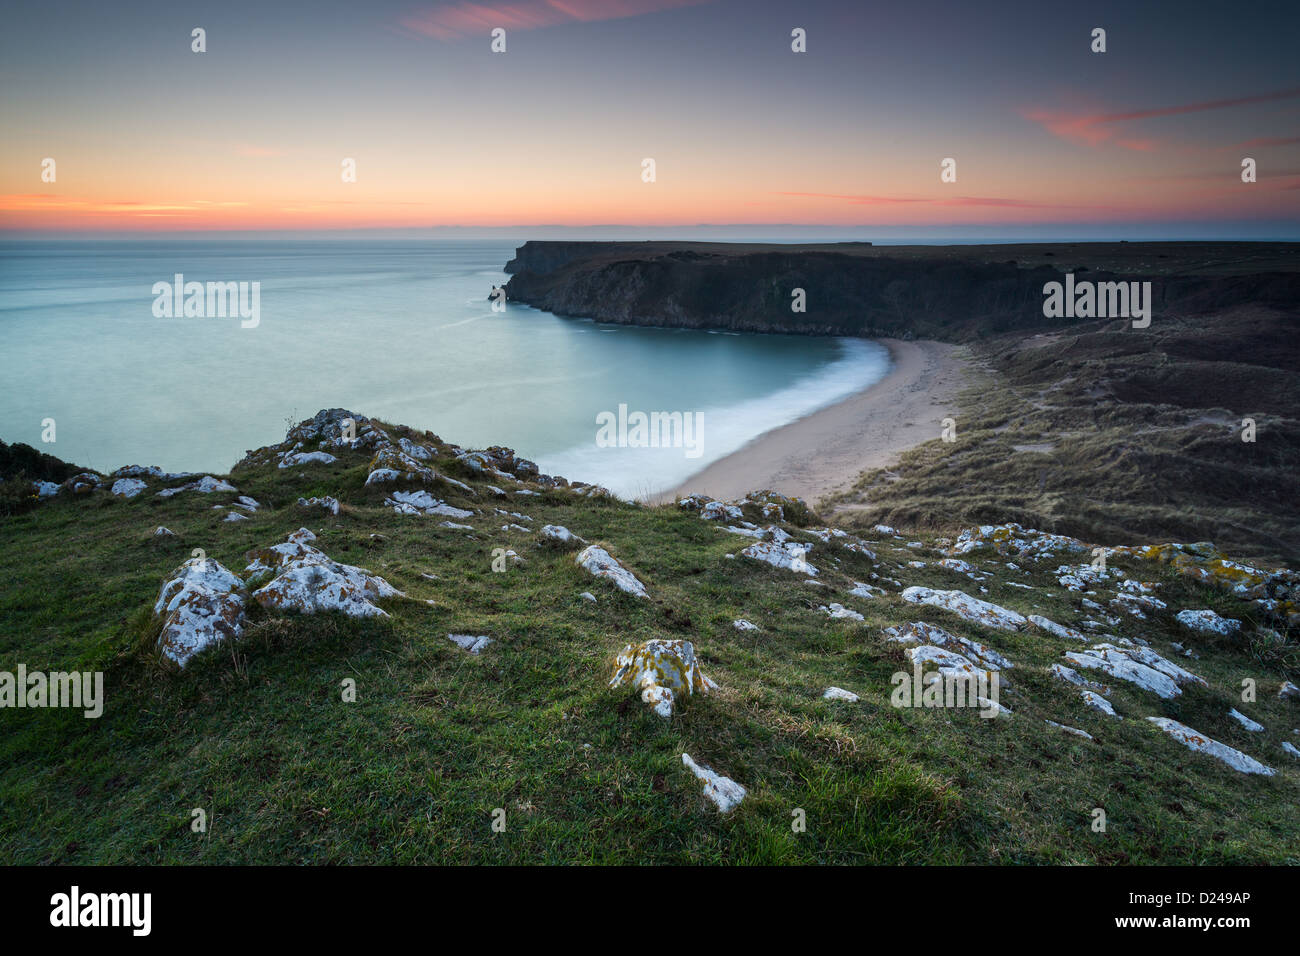 Barafundle Bay in Pembrokeshire, Wales. Winter sunset over the golden beach and sand dunes. Stock Photo